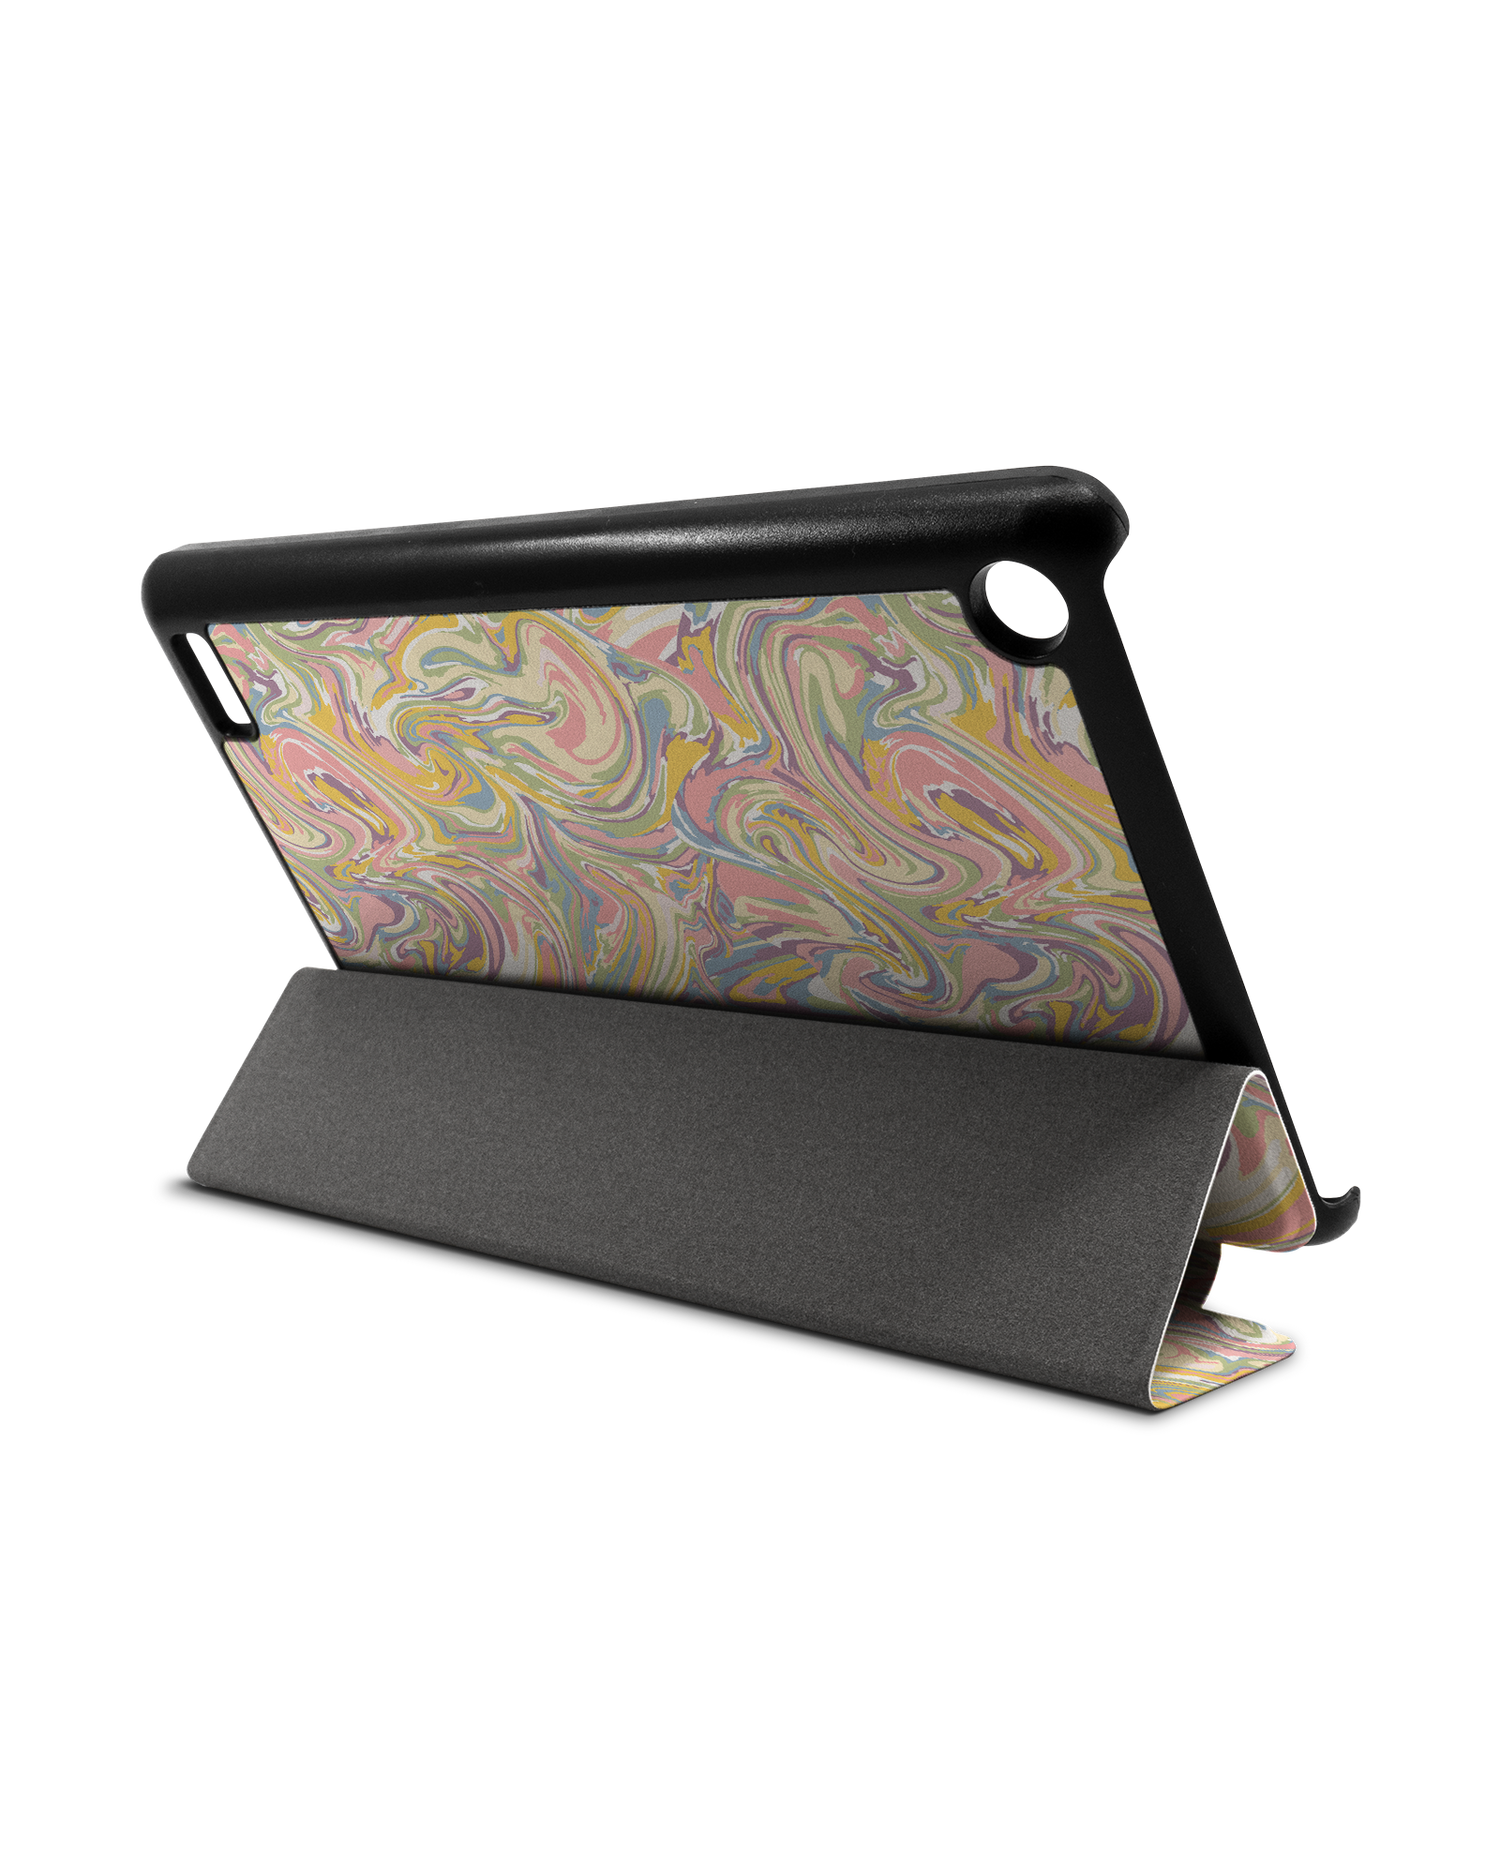 Psychedelic Optics Tablet Smart Case for Amazon Fire 7: Used as Stand